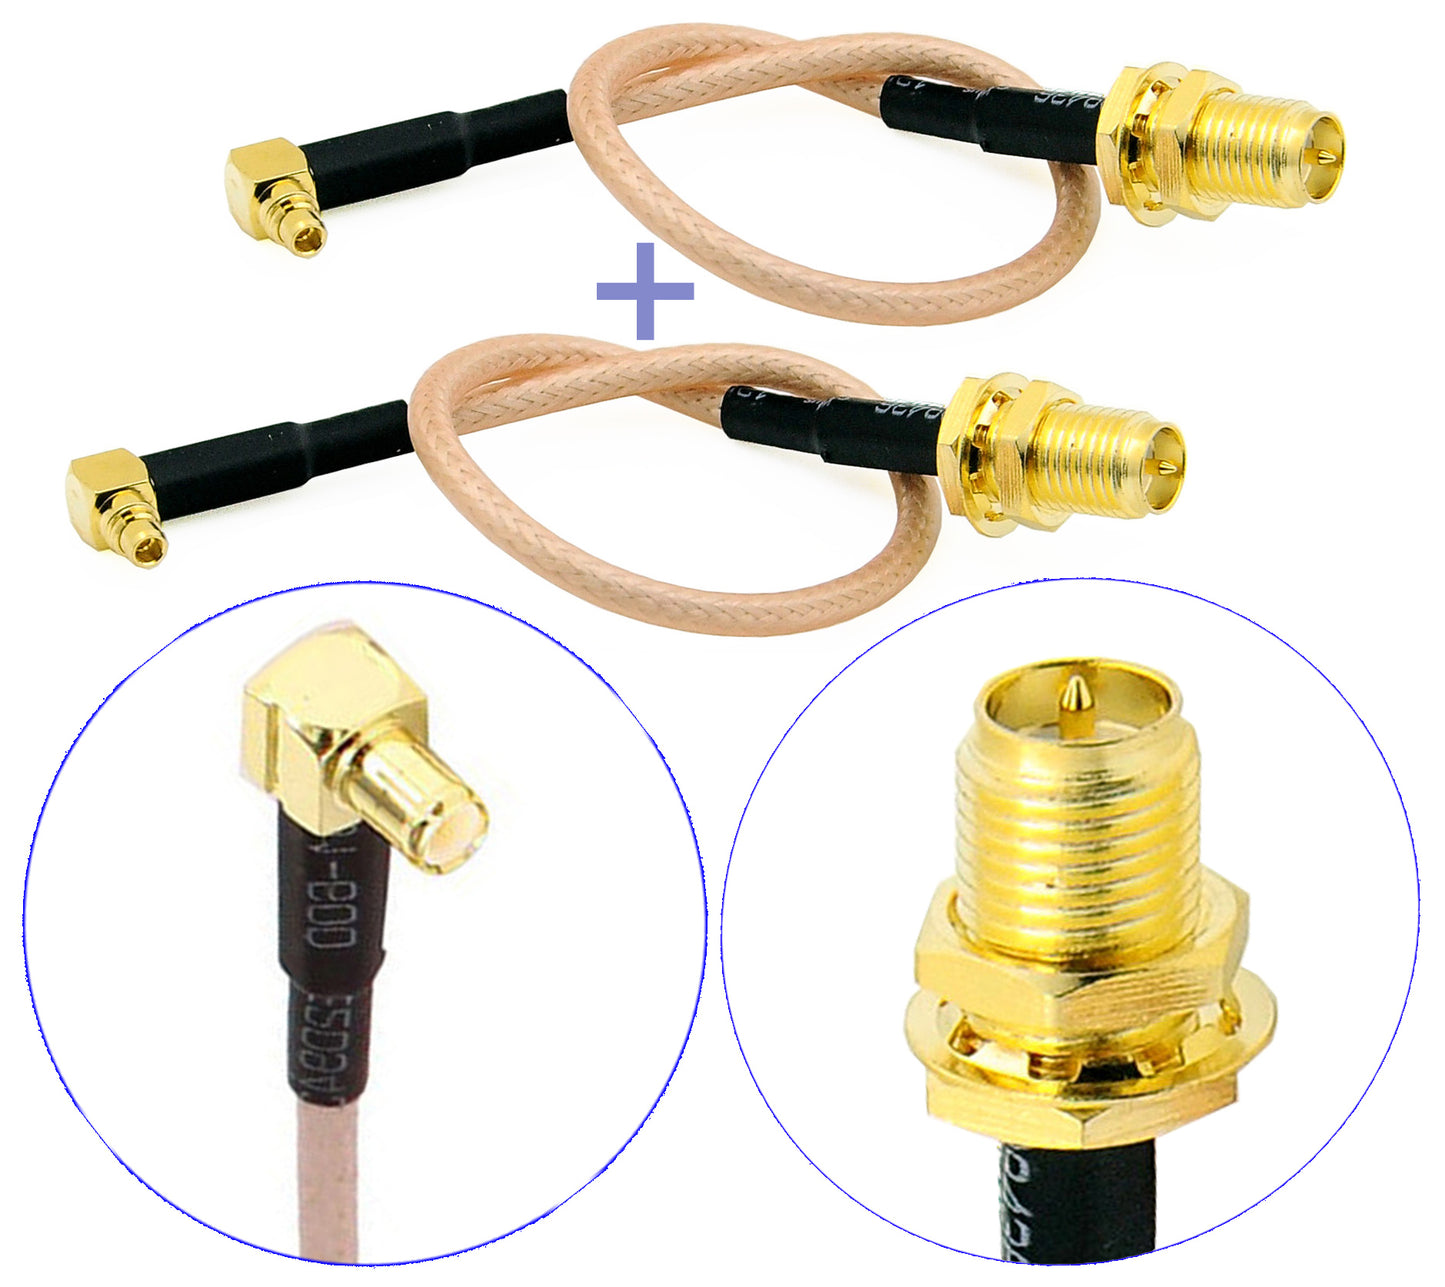 Pack of 2 RF RG316 Pigtail RP-SMA Female Antenna Connector to MMCX Male Low Loss Coaxial Cable Adapter Right Angle